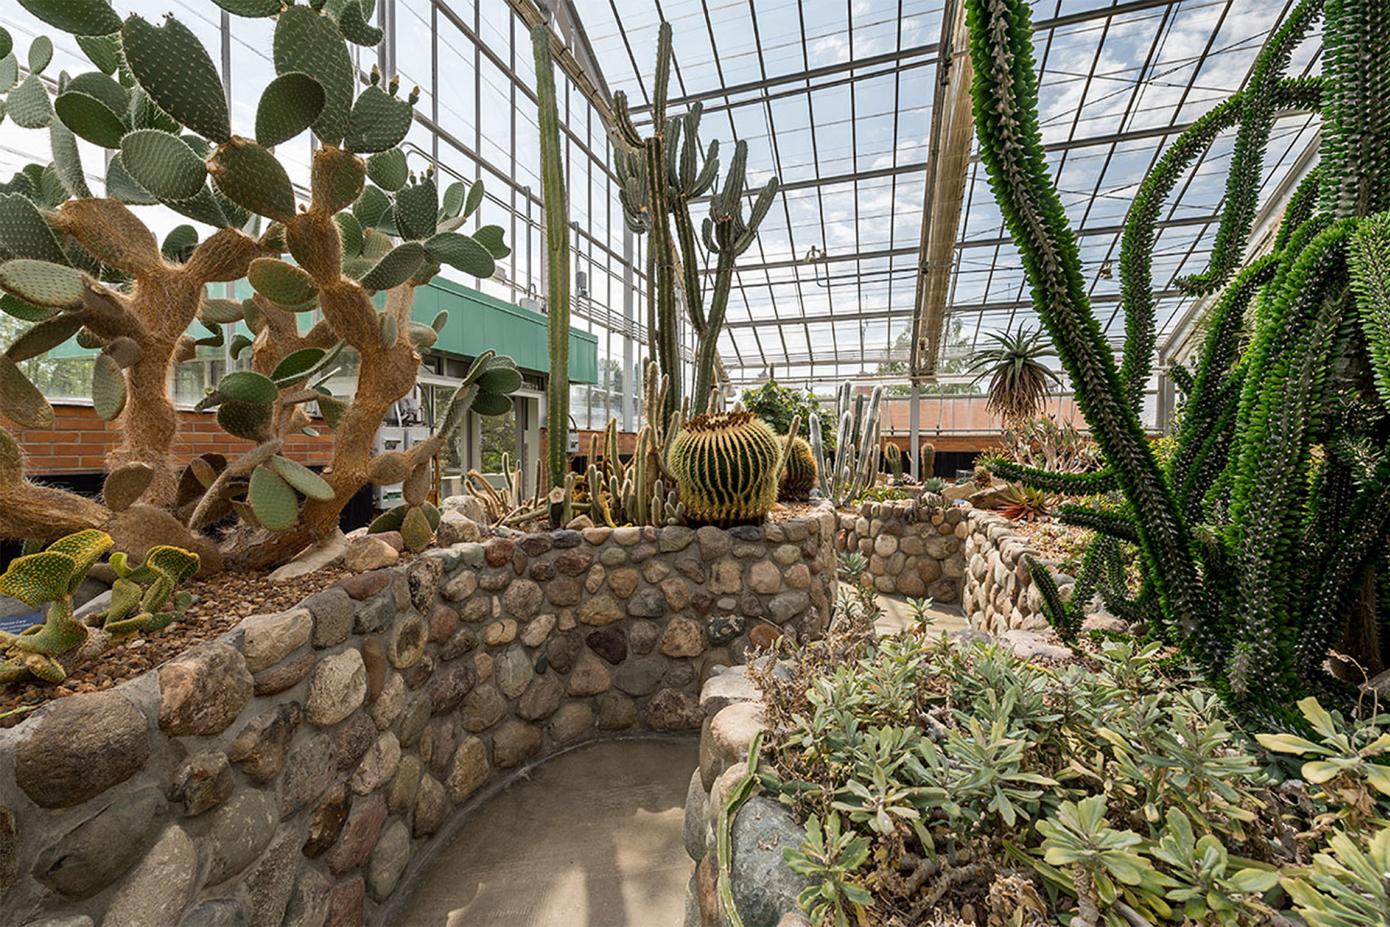 A view of the arid house